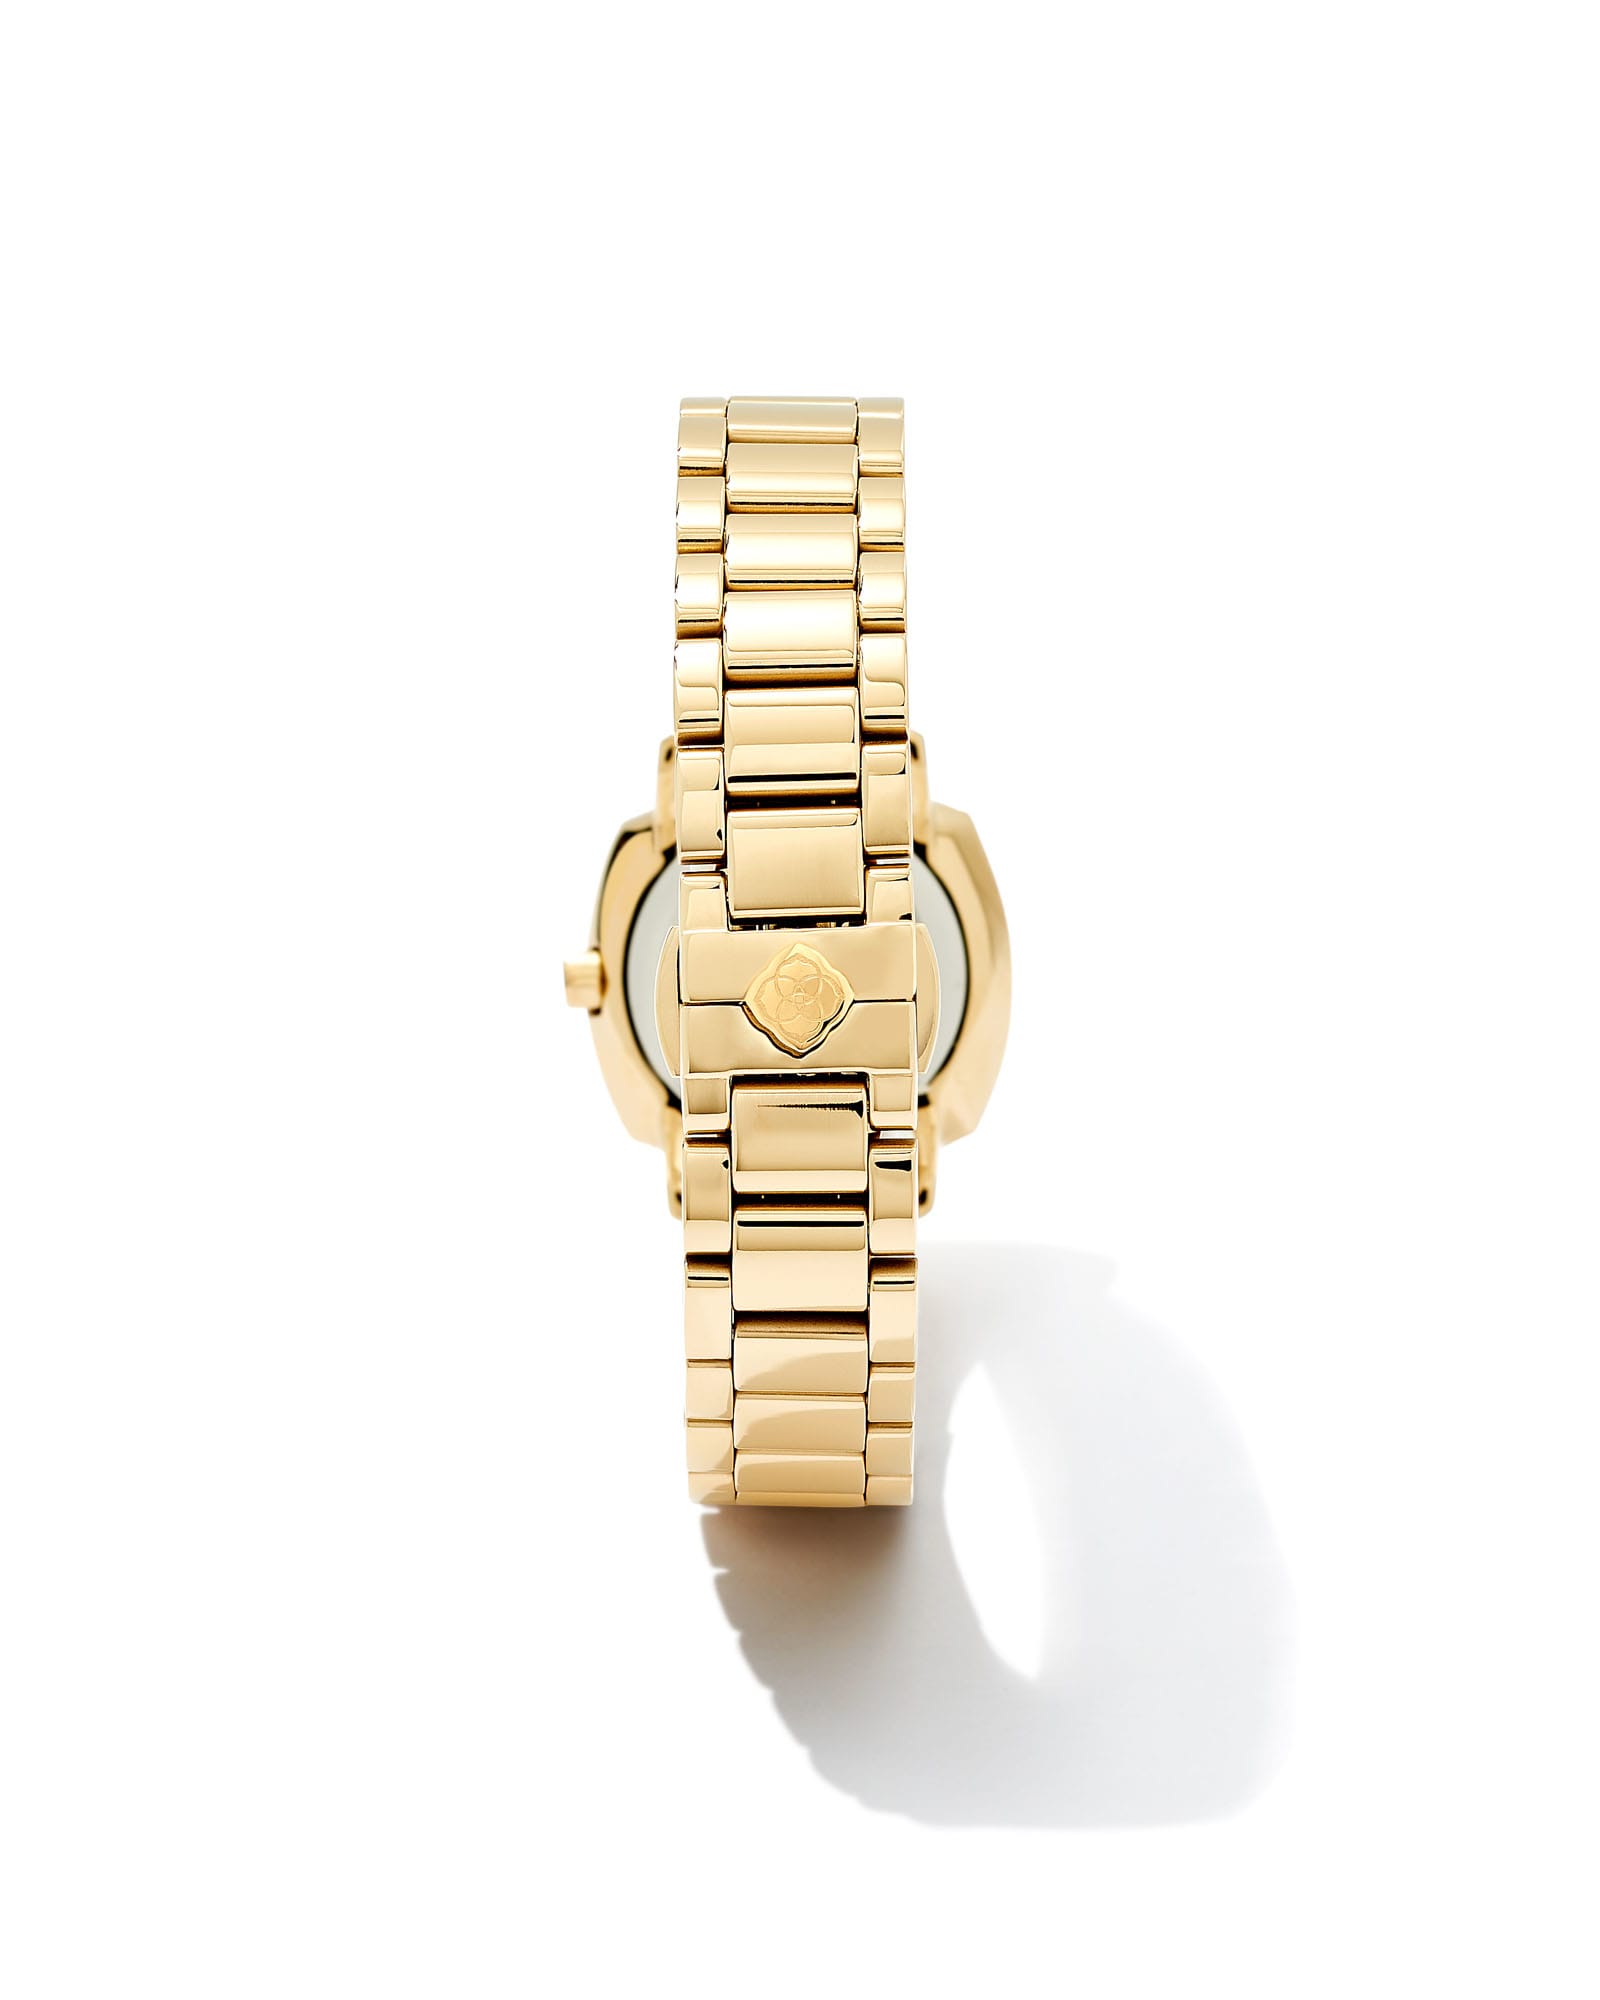 Dira Gold Tone Stainless Steel 28mm Watch in Light Iridescent Sunray